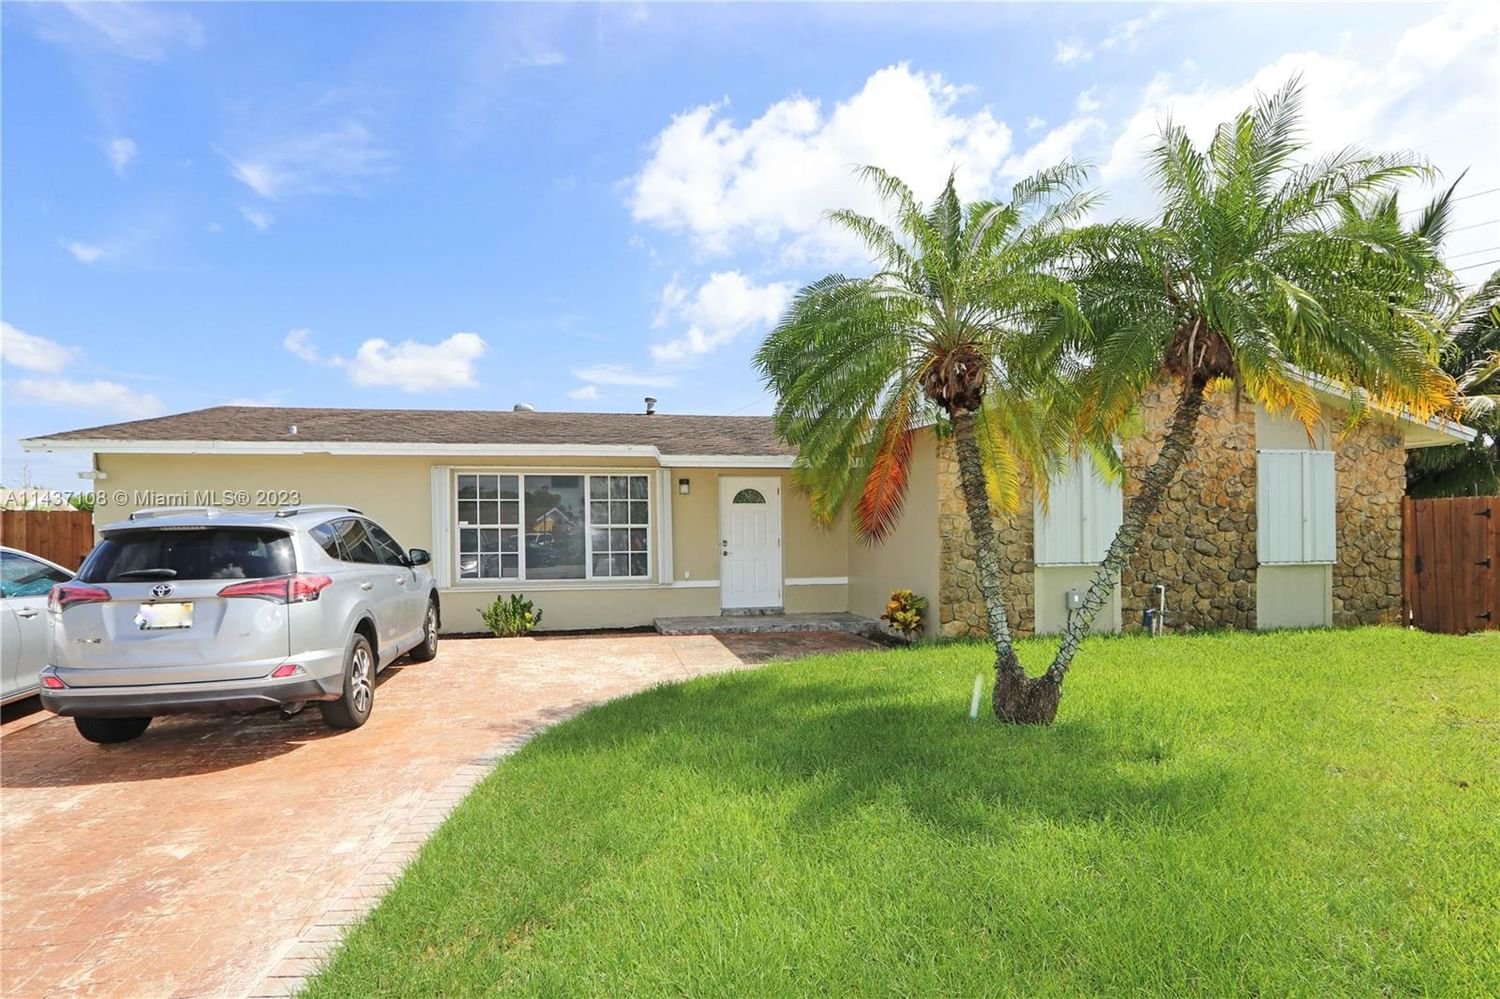 Real estate property located at 13611 73rd St, Miami-Dade County, Miami, FL